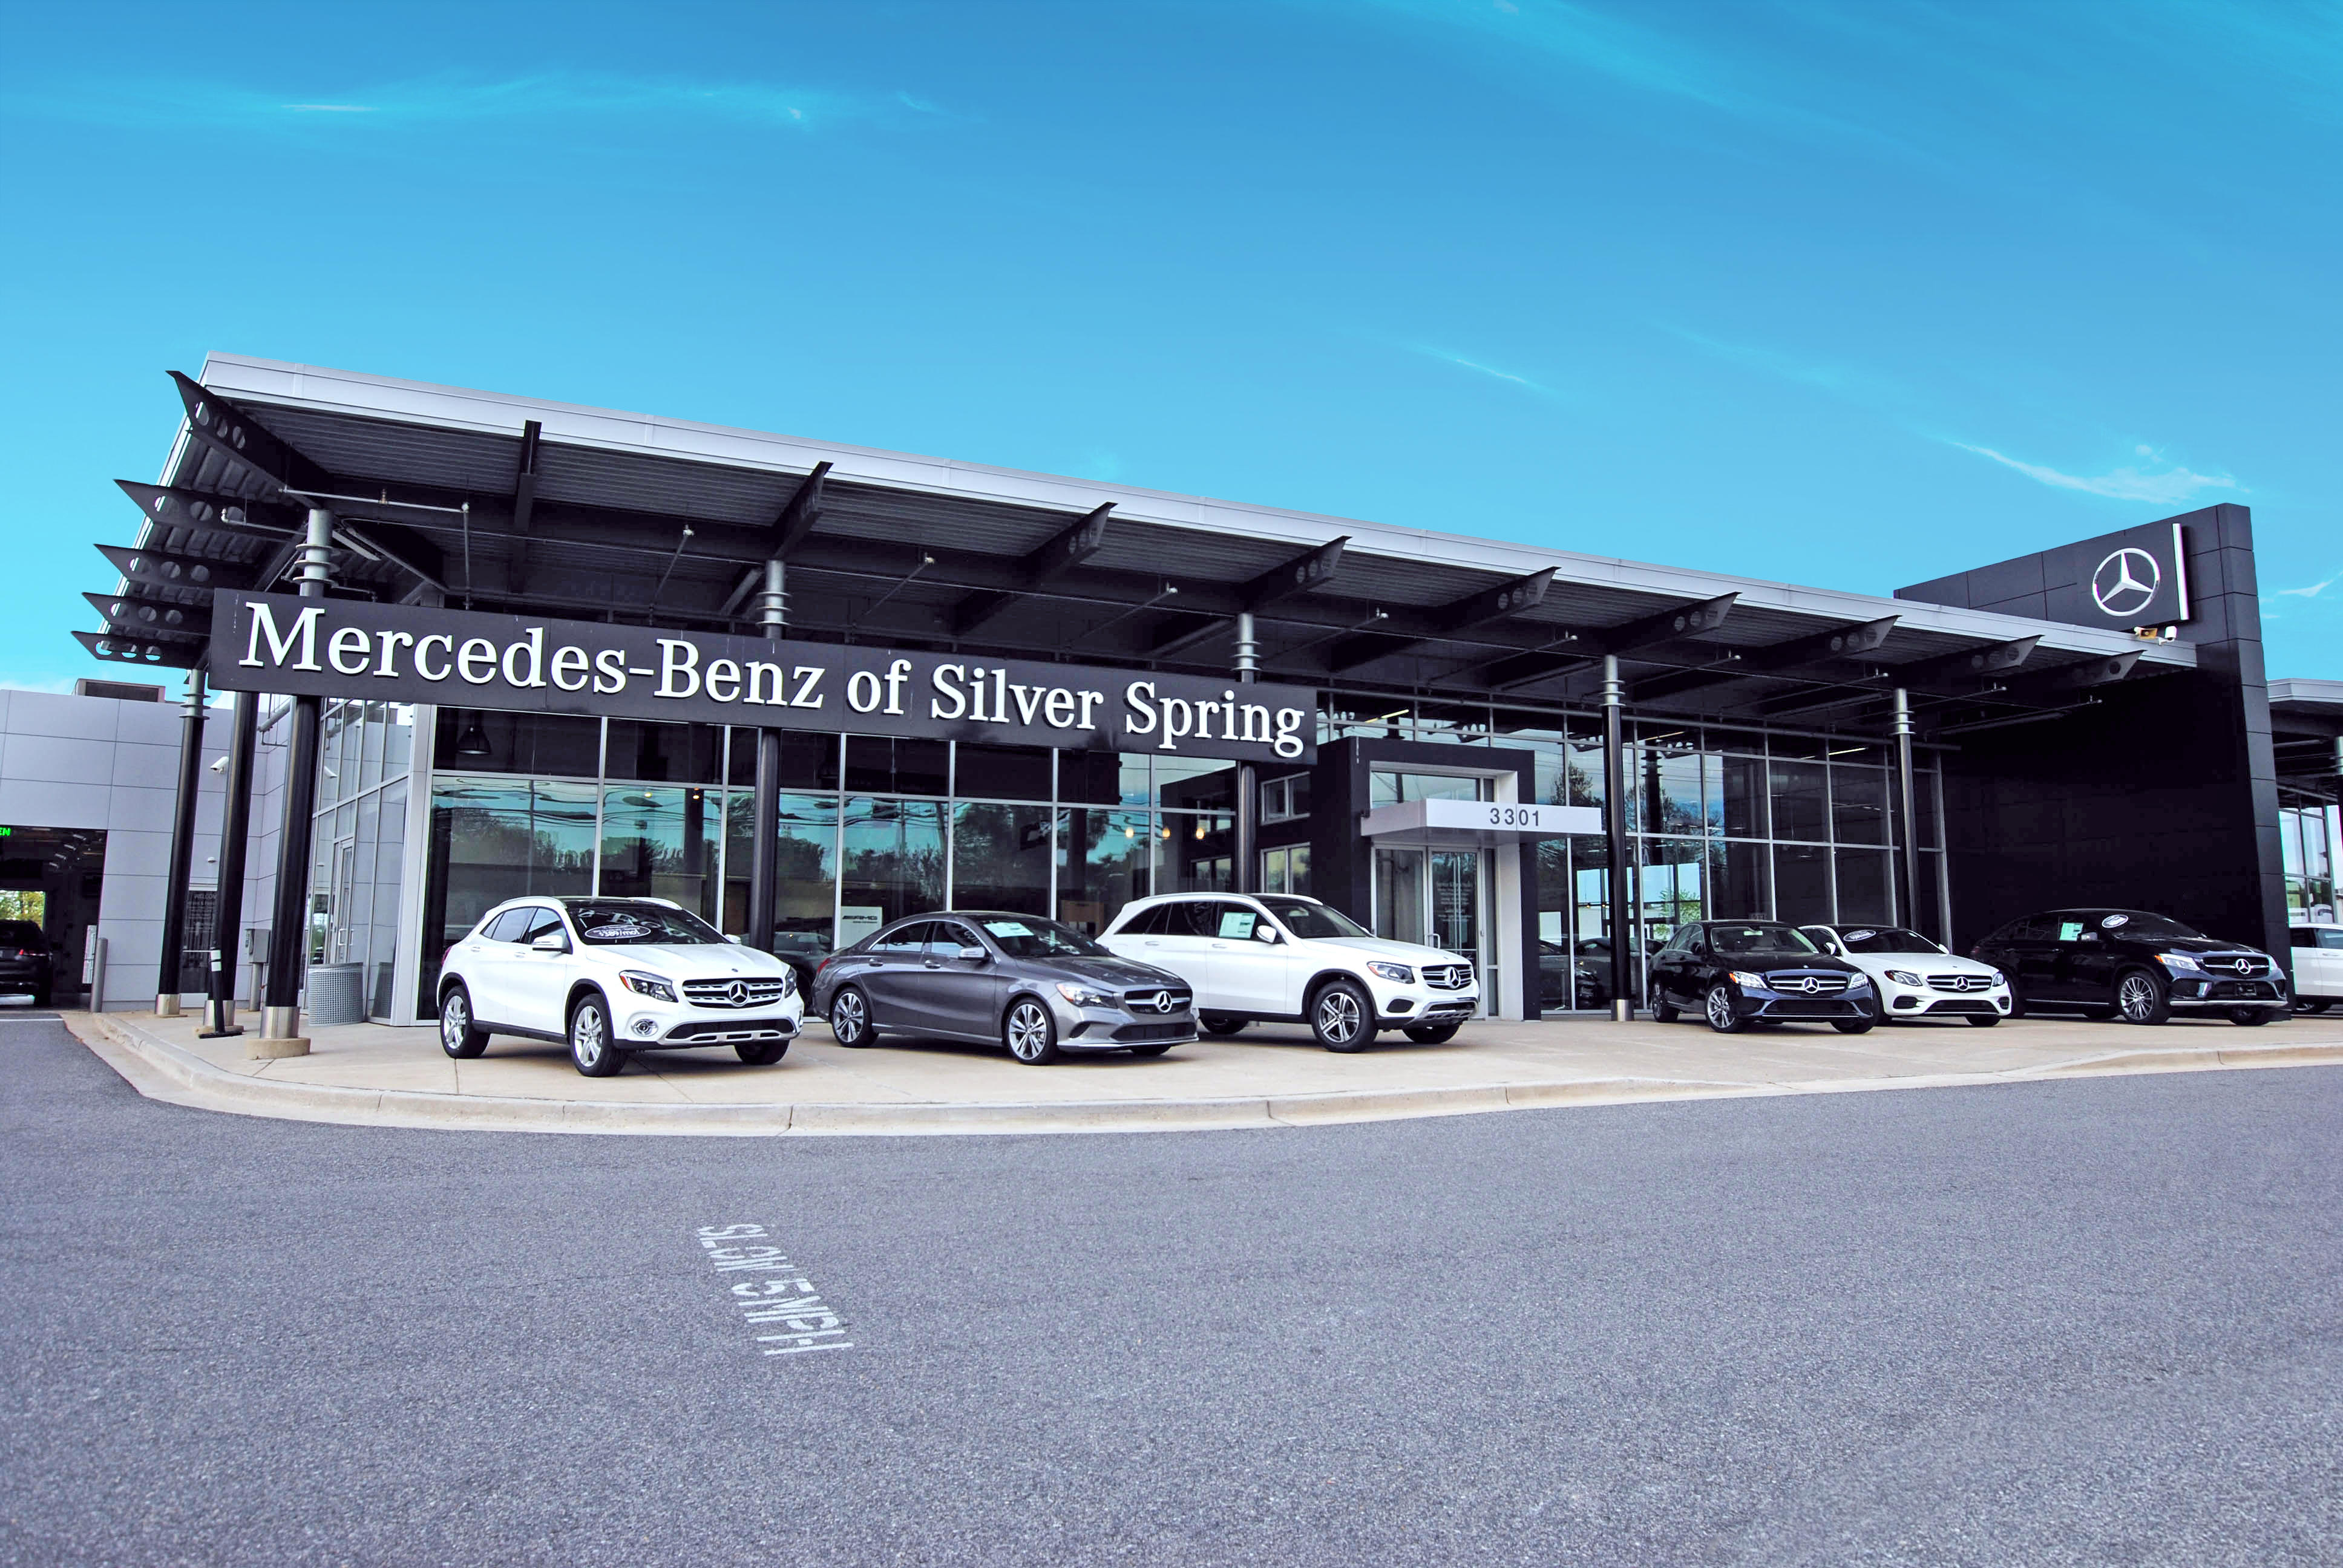 Mercedes-Benz of Silver Spring - Silver Spring, MD 20904 - (877)658-3780 | ShowMeLocal.com